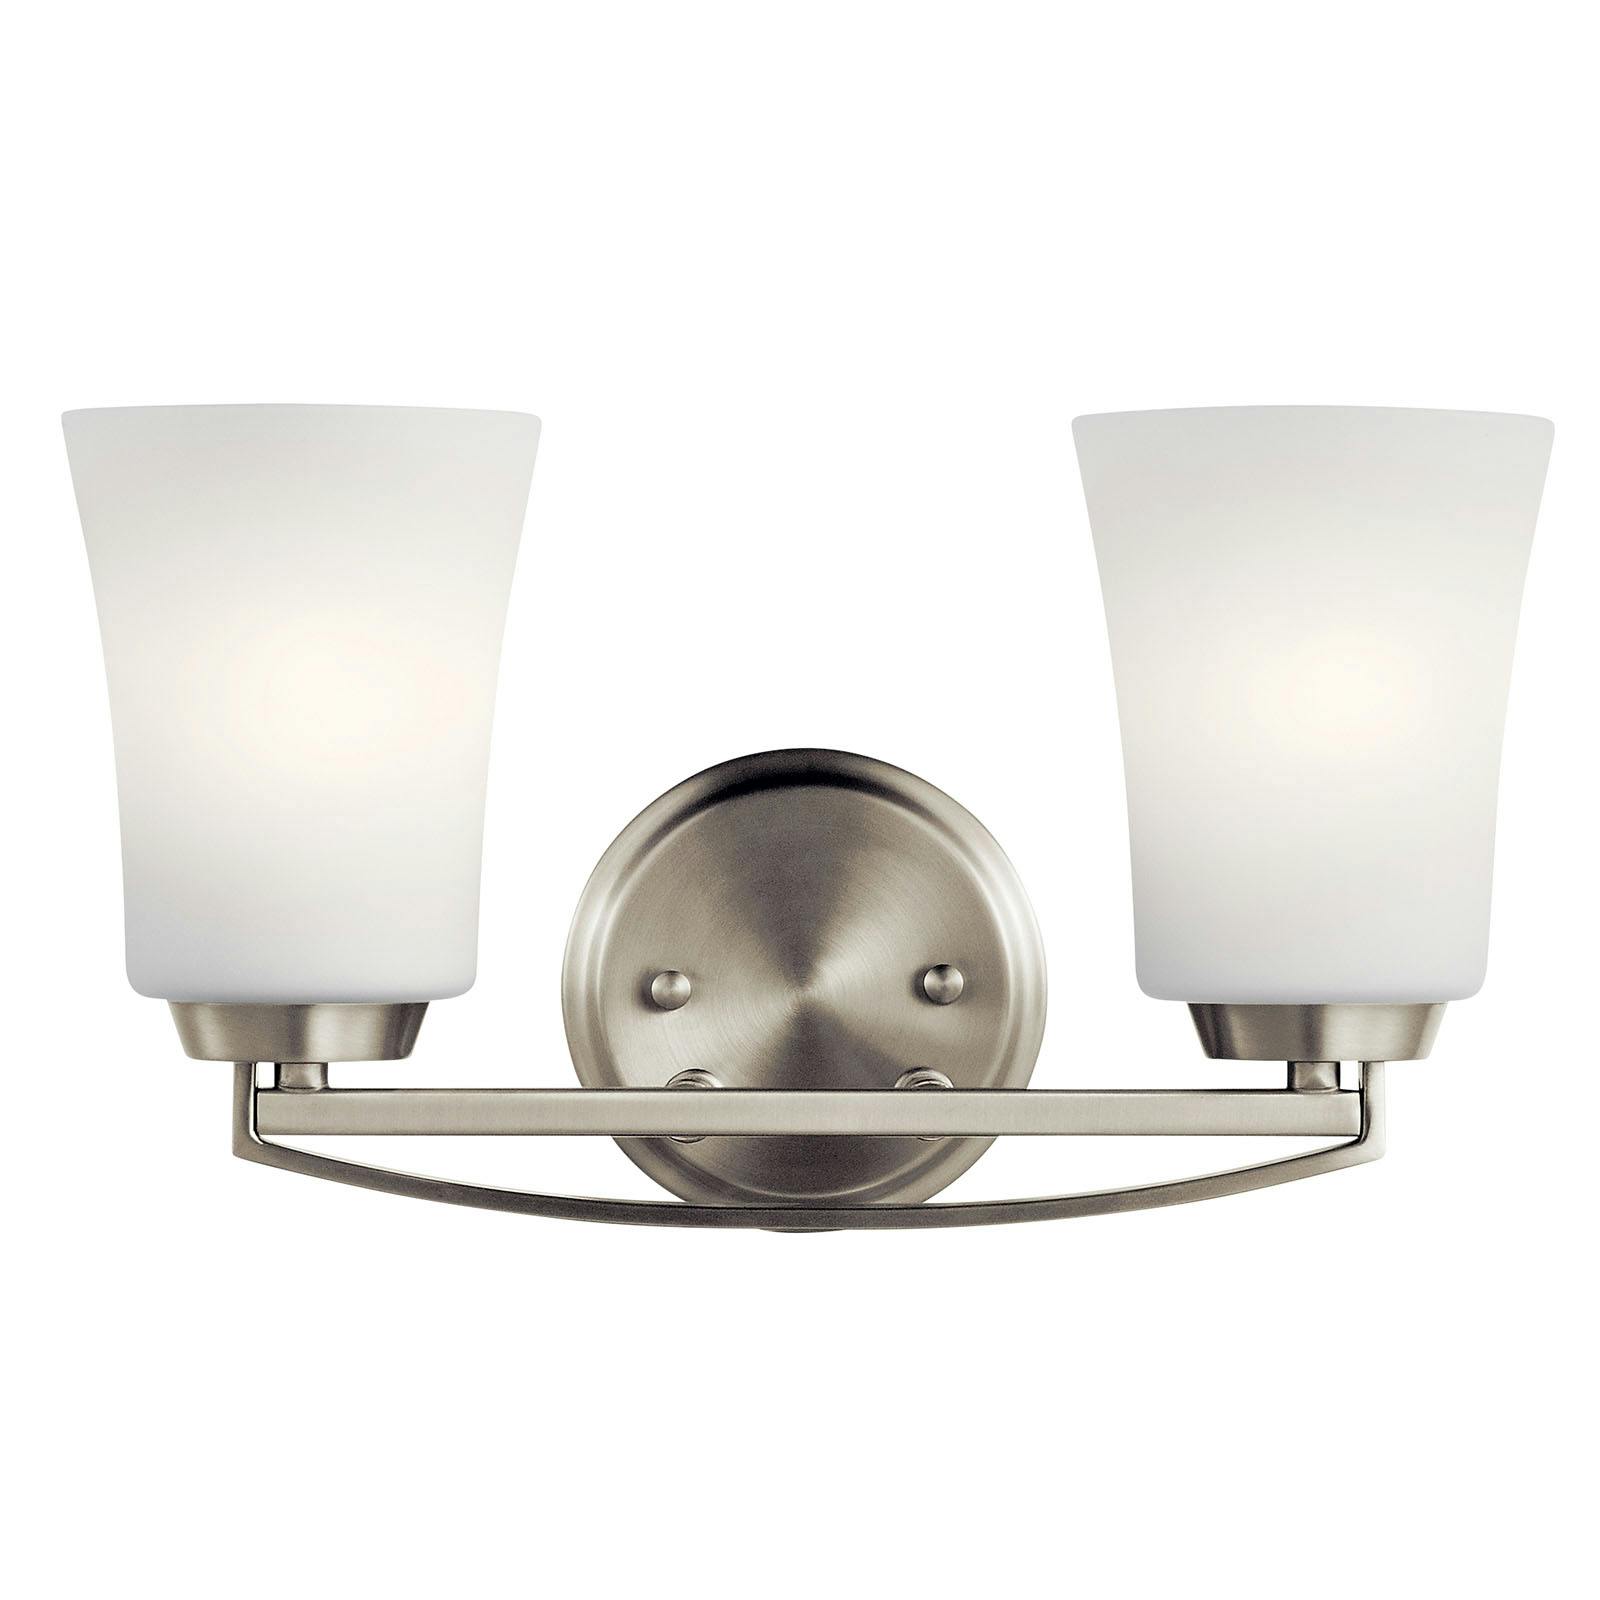 The Tao 2 Light Vanity Light Brushed Nickel facing up on a white background